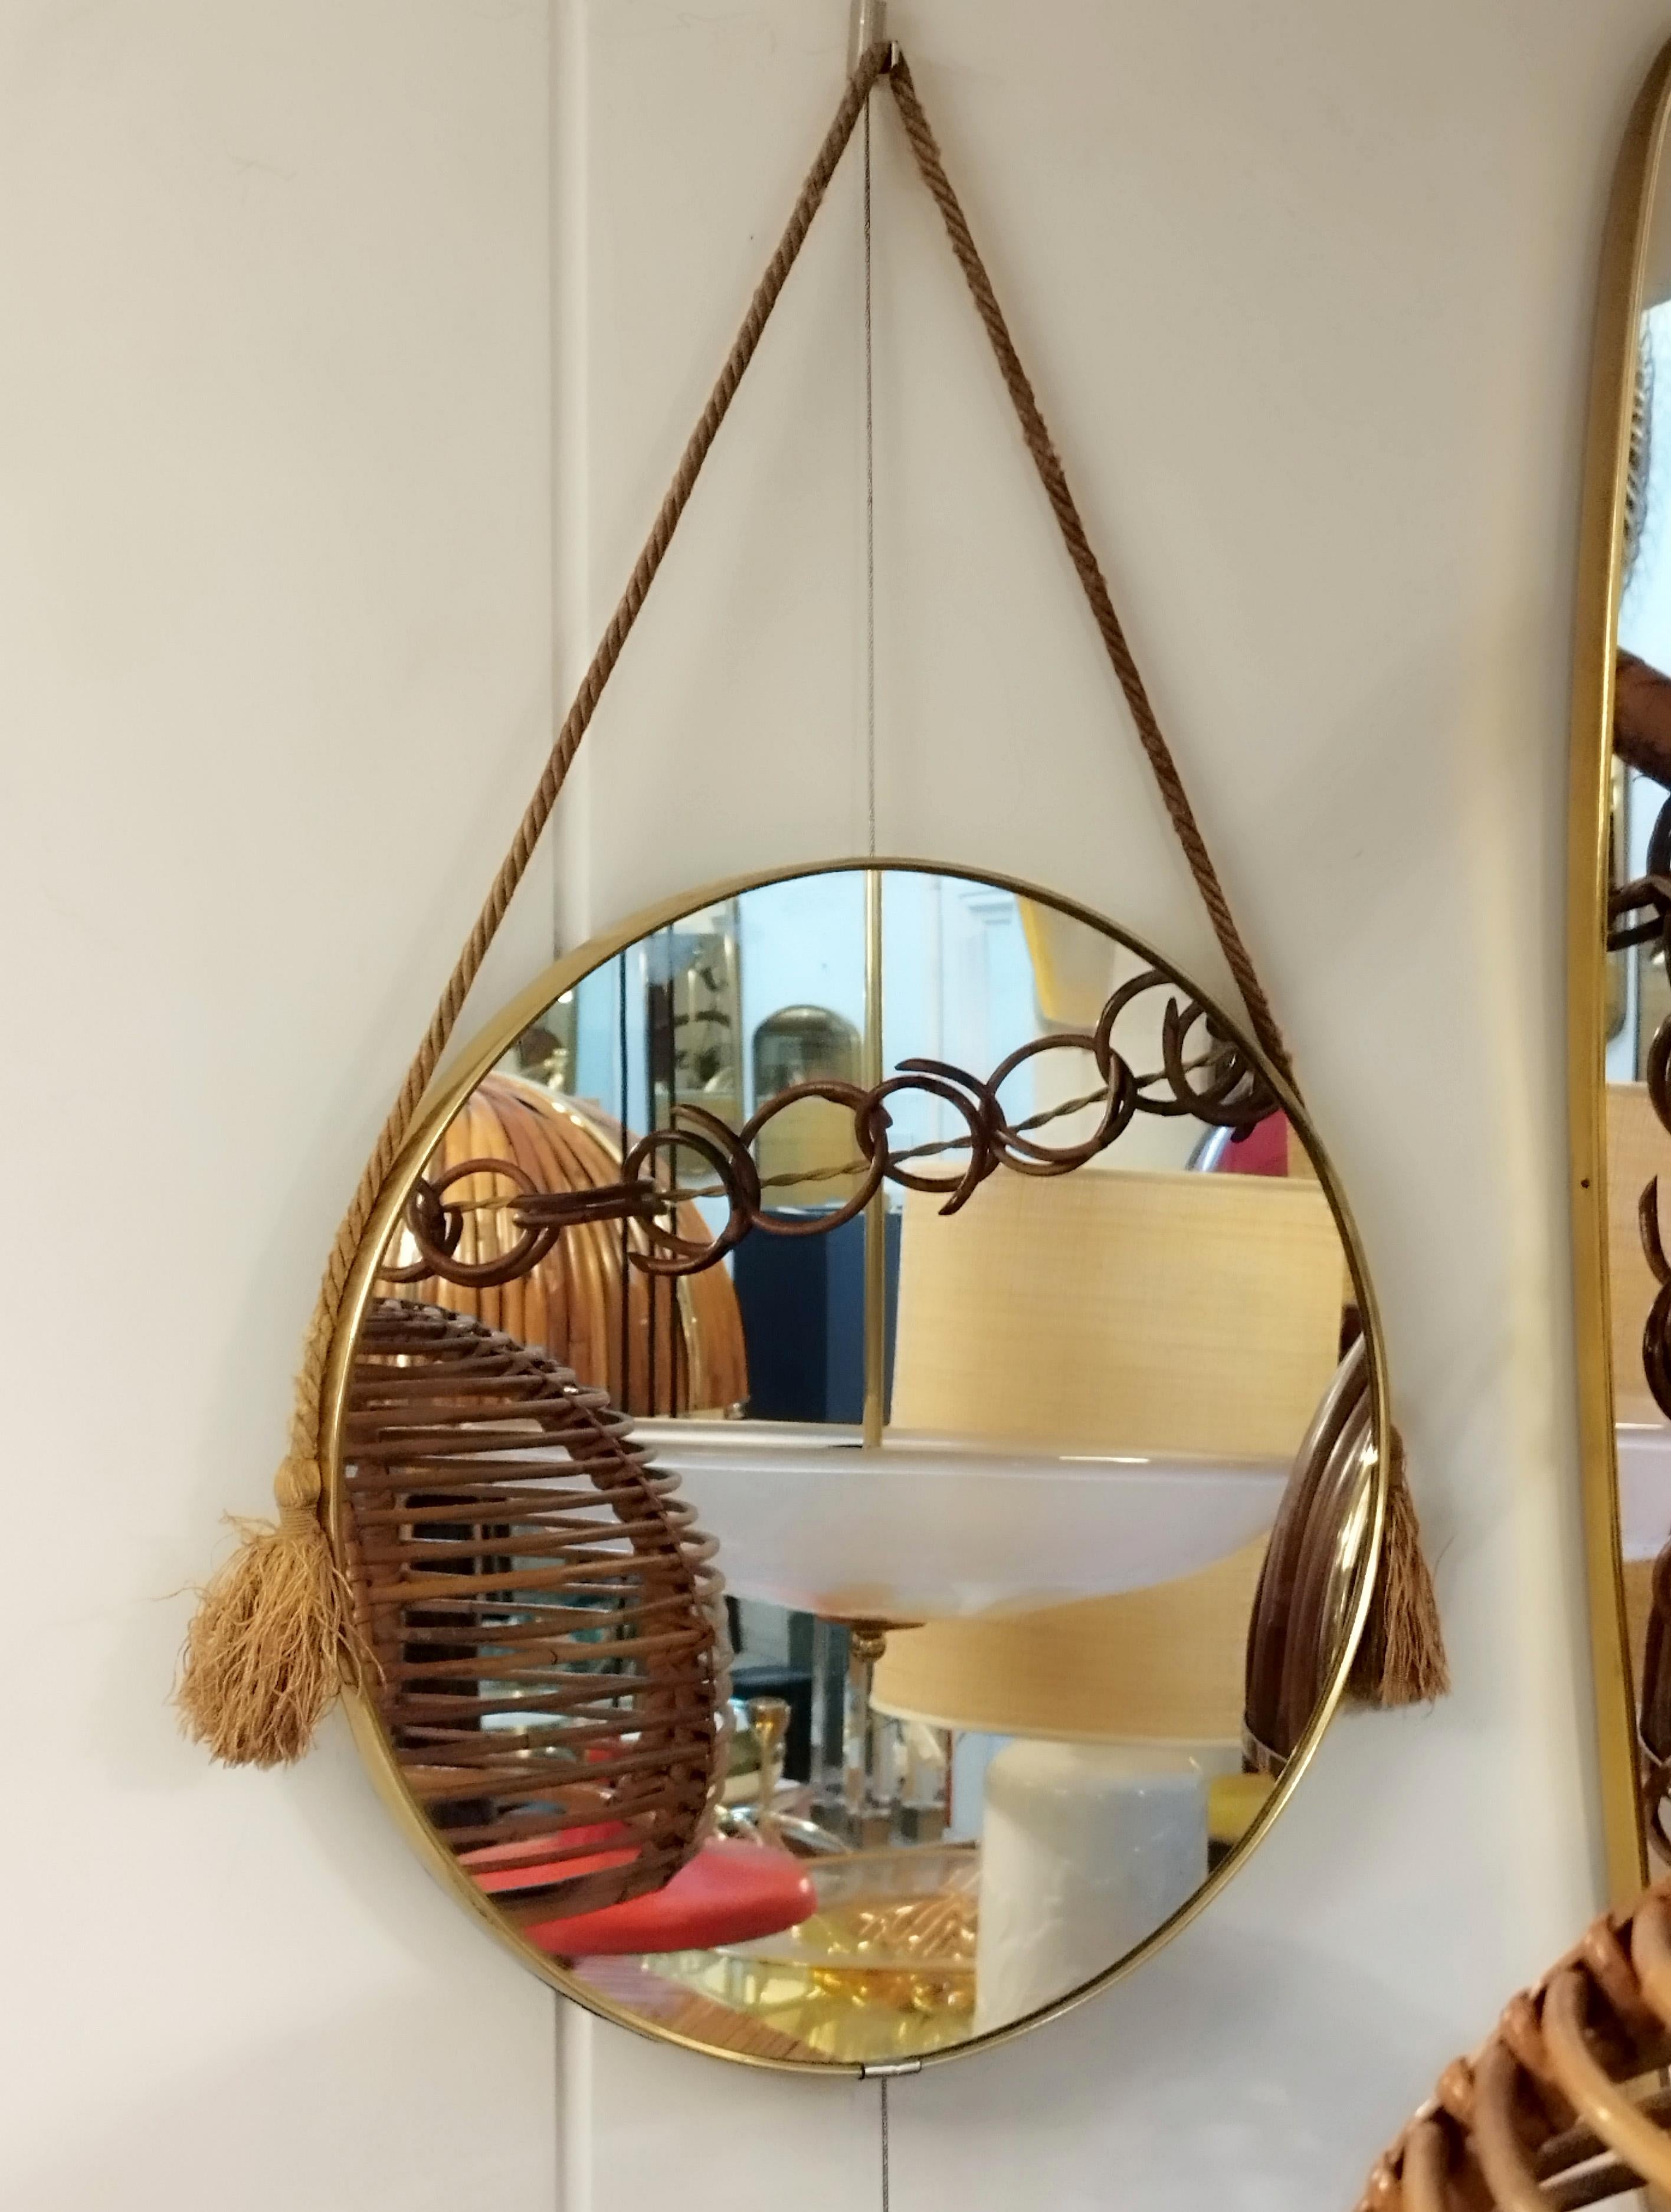 1950s round mirror of Italian manufacture.
Frame made of 3mm brass foil and hook made with braid cord and 